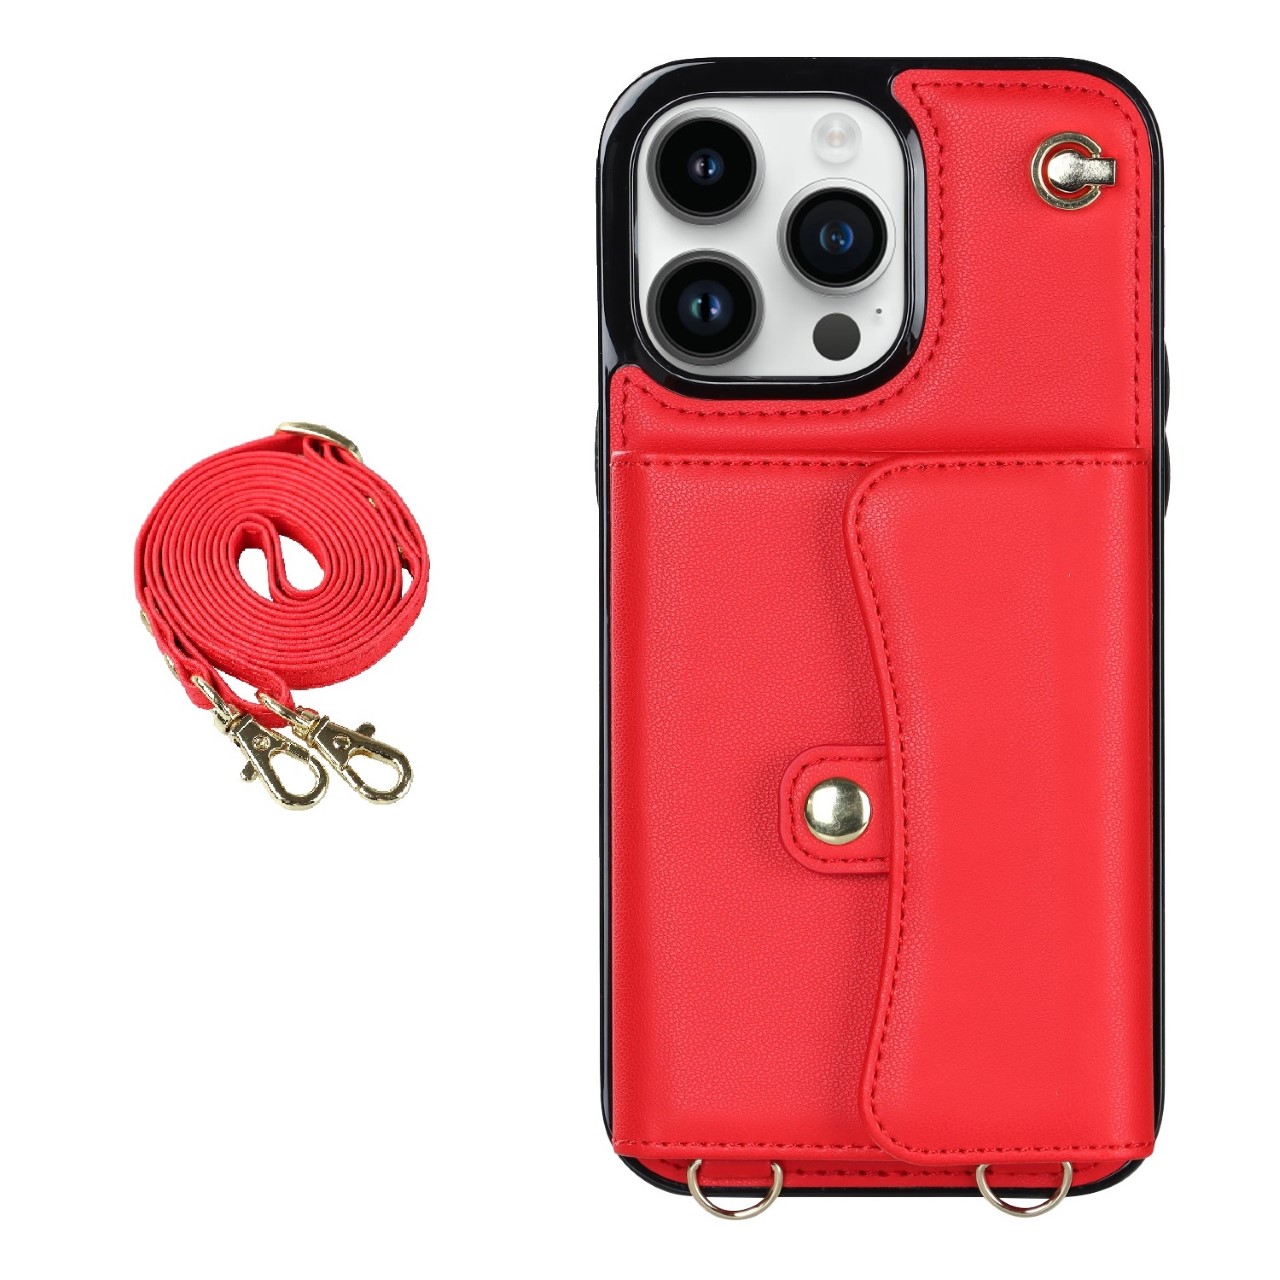 Samsung Galaxy A52 Back Cover Hoesje met Koord - Back Cover - Kunstleer - Pasjeshouder - Koord - Samsung Galaxy A52 - Rood